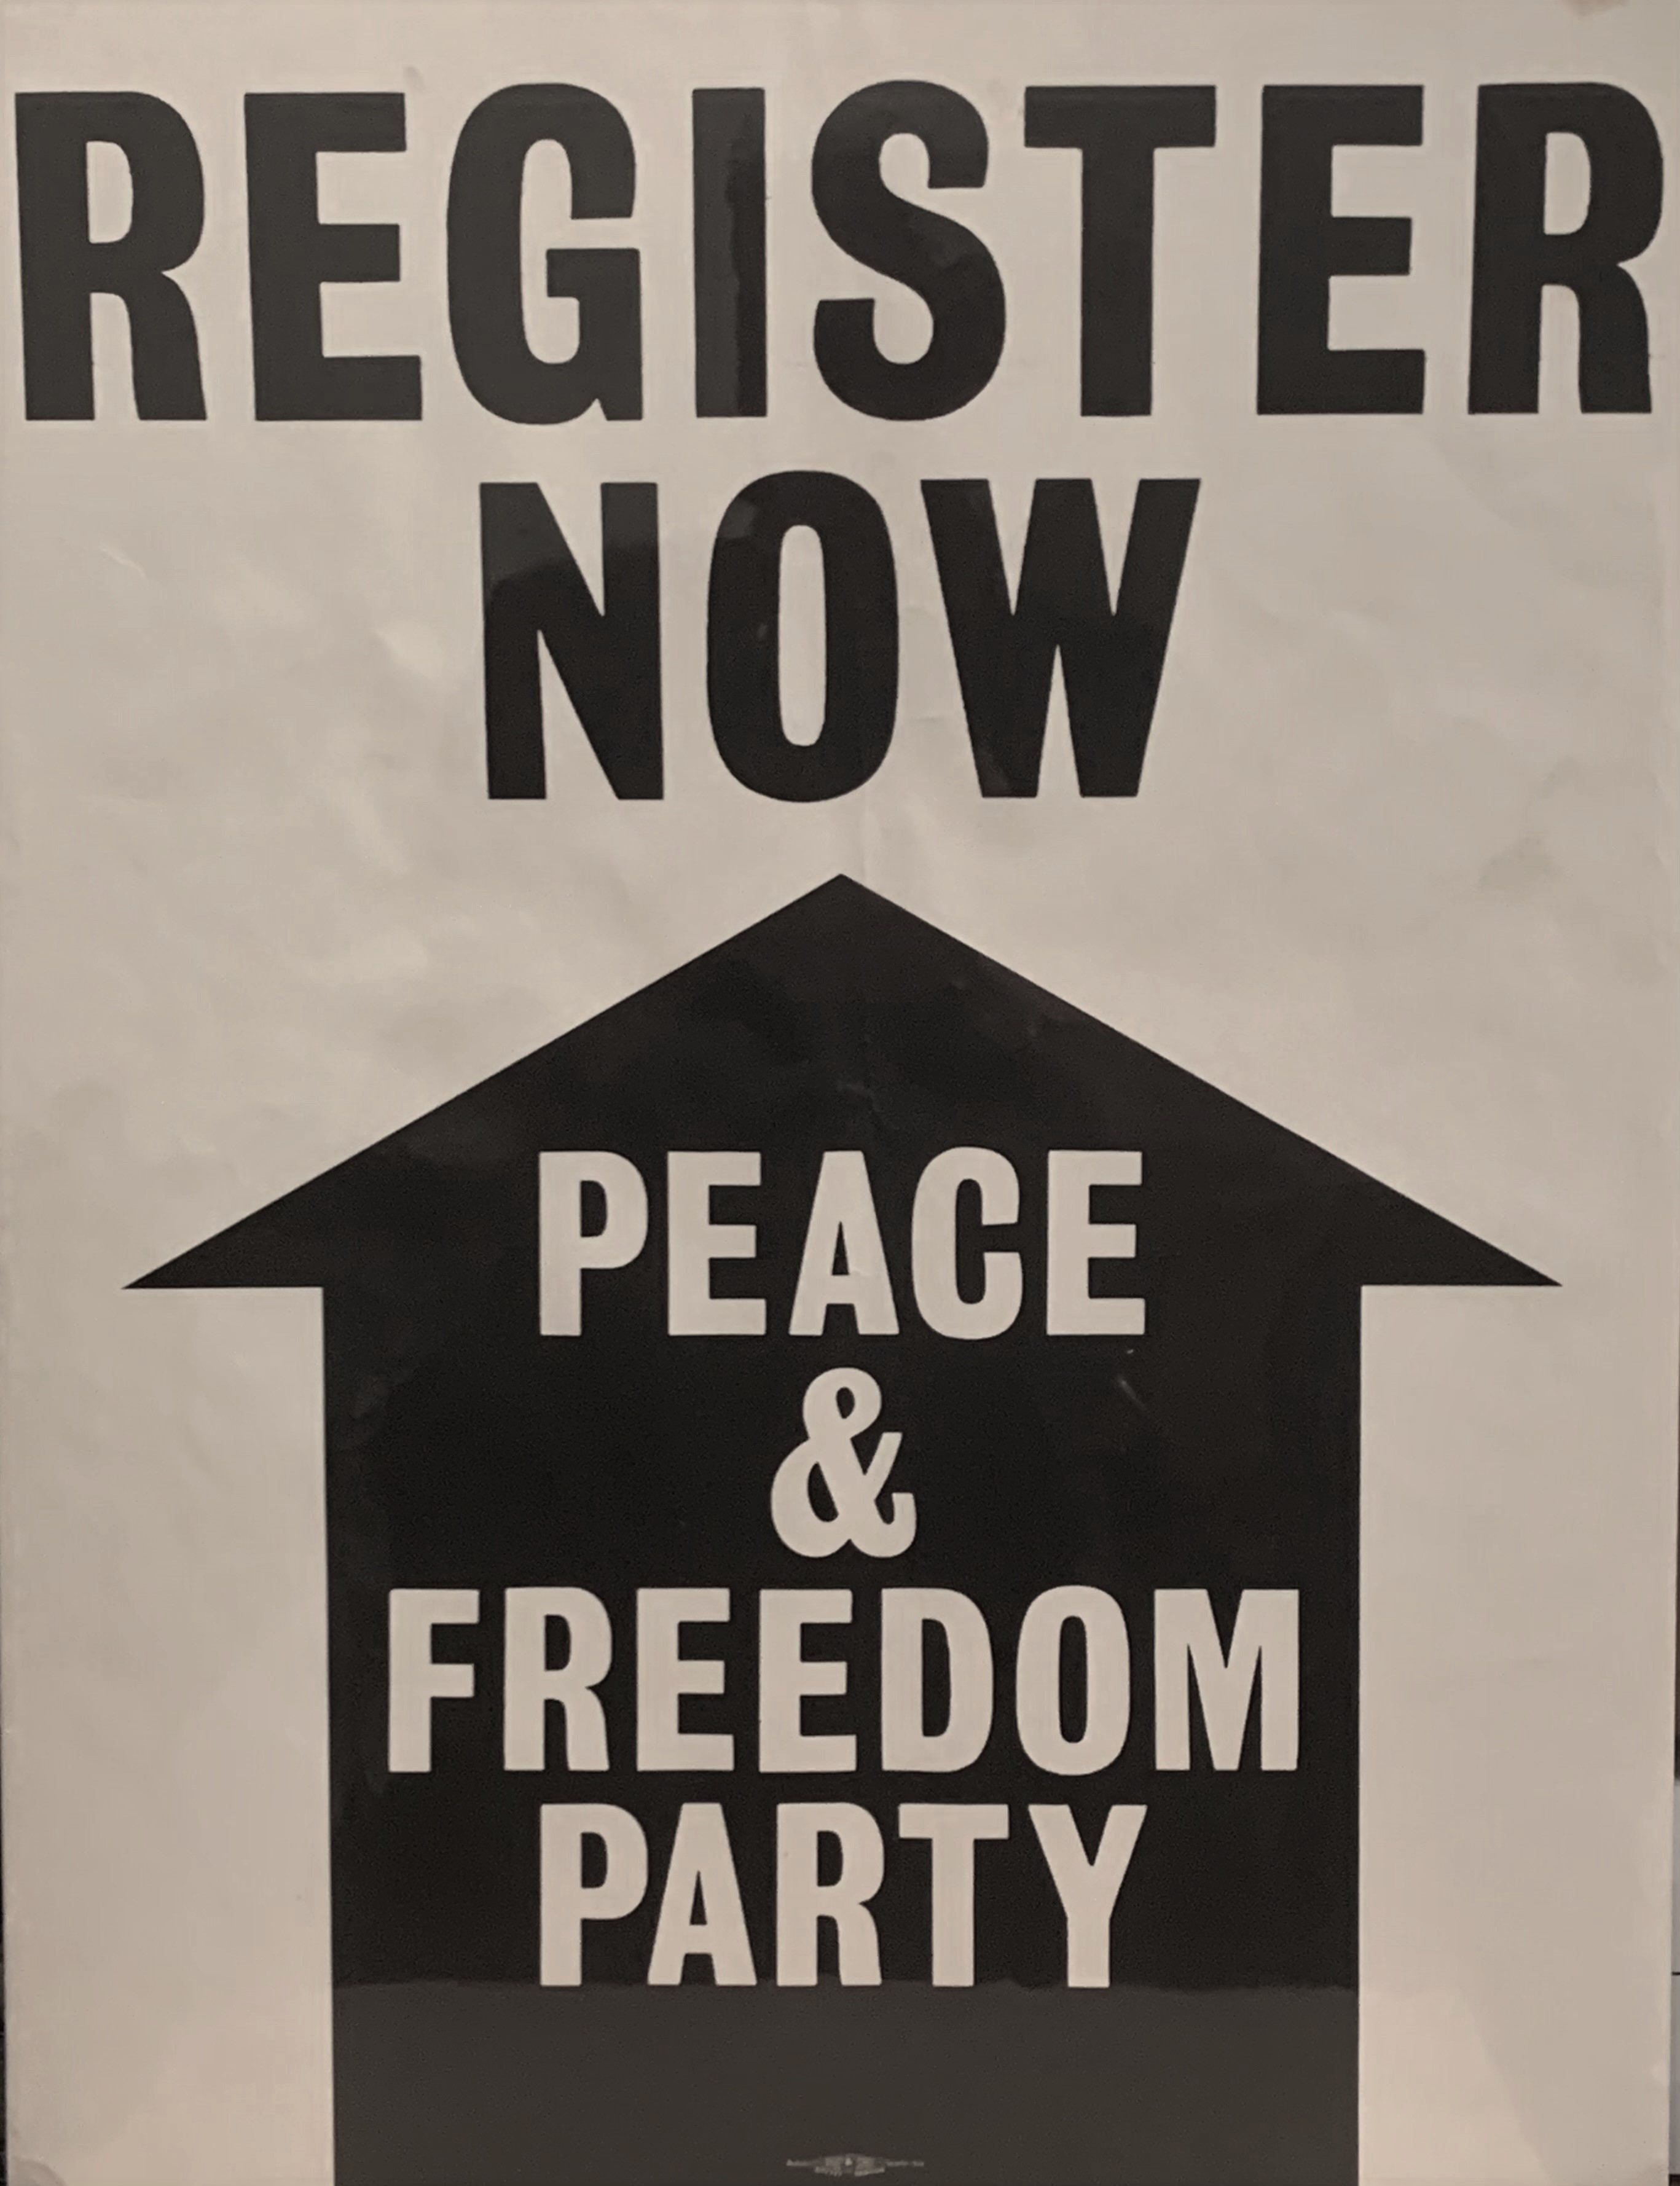 (PEACE AND FREEDOM PARTY). Peace and Freedom Party - PEACE AND FREEDOM PARTY: 1968 ELDRIDGE CLEAVER FOR PRESIDENT / PEGGY TERRY FOR VICE-PRESIDENT TICKET 